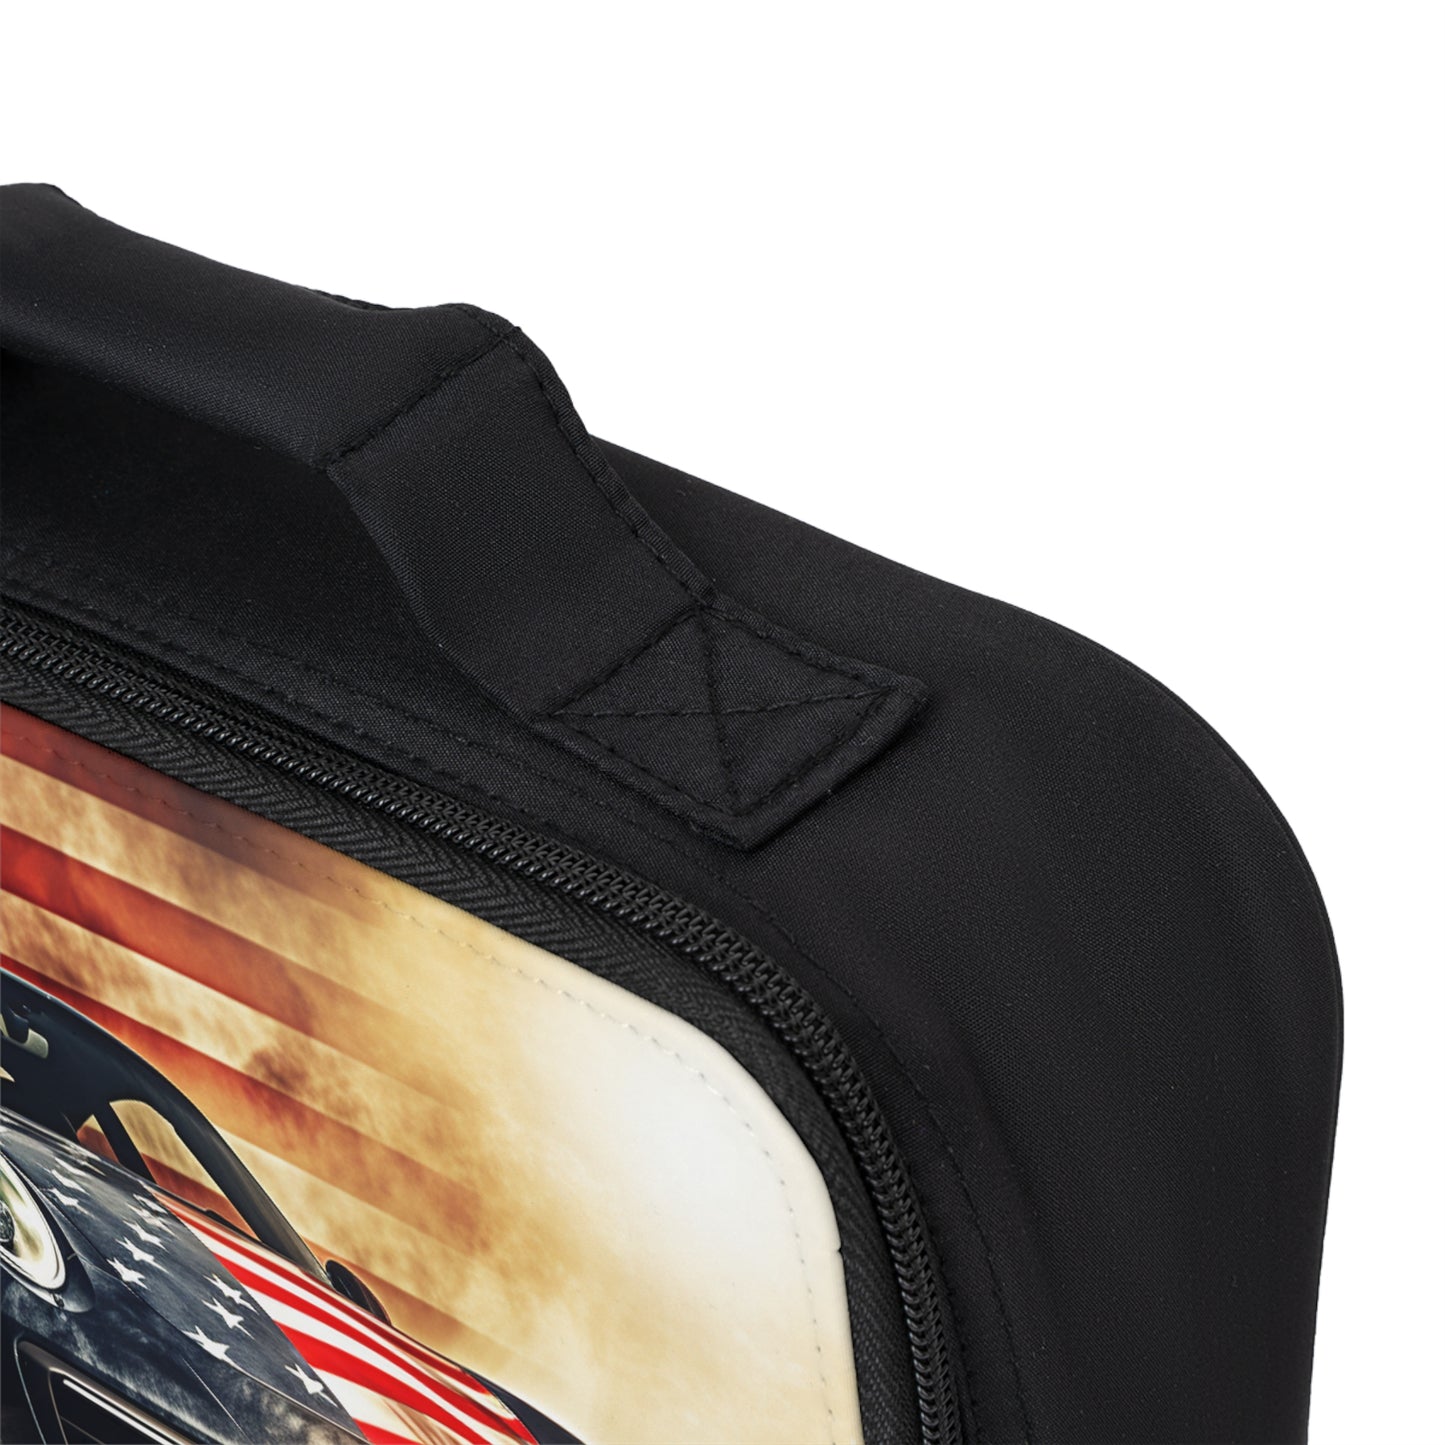 Lunch Bag Abstract American Flag Background Porsche 1